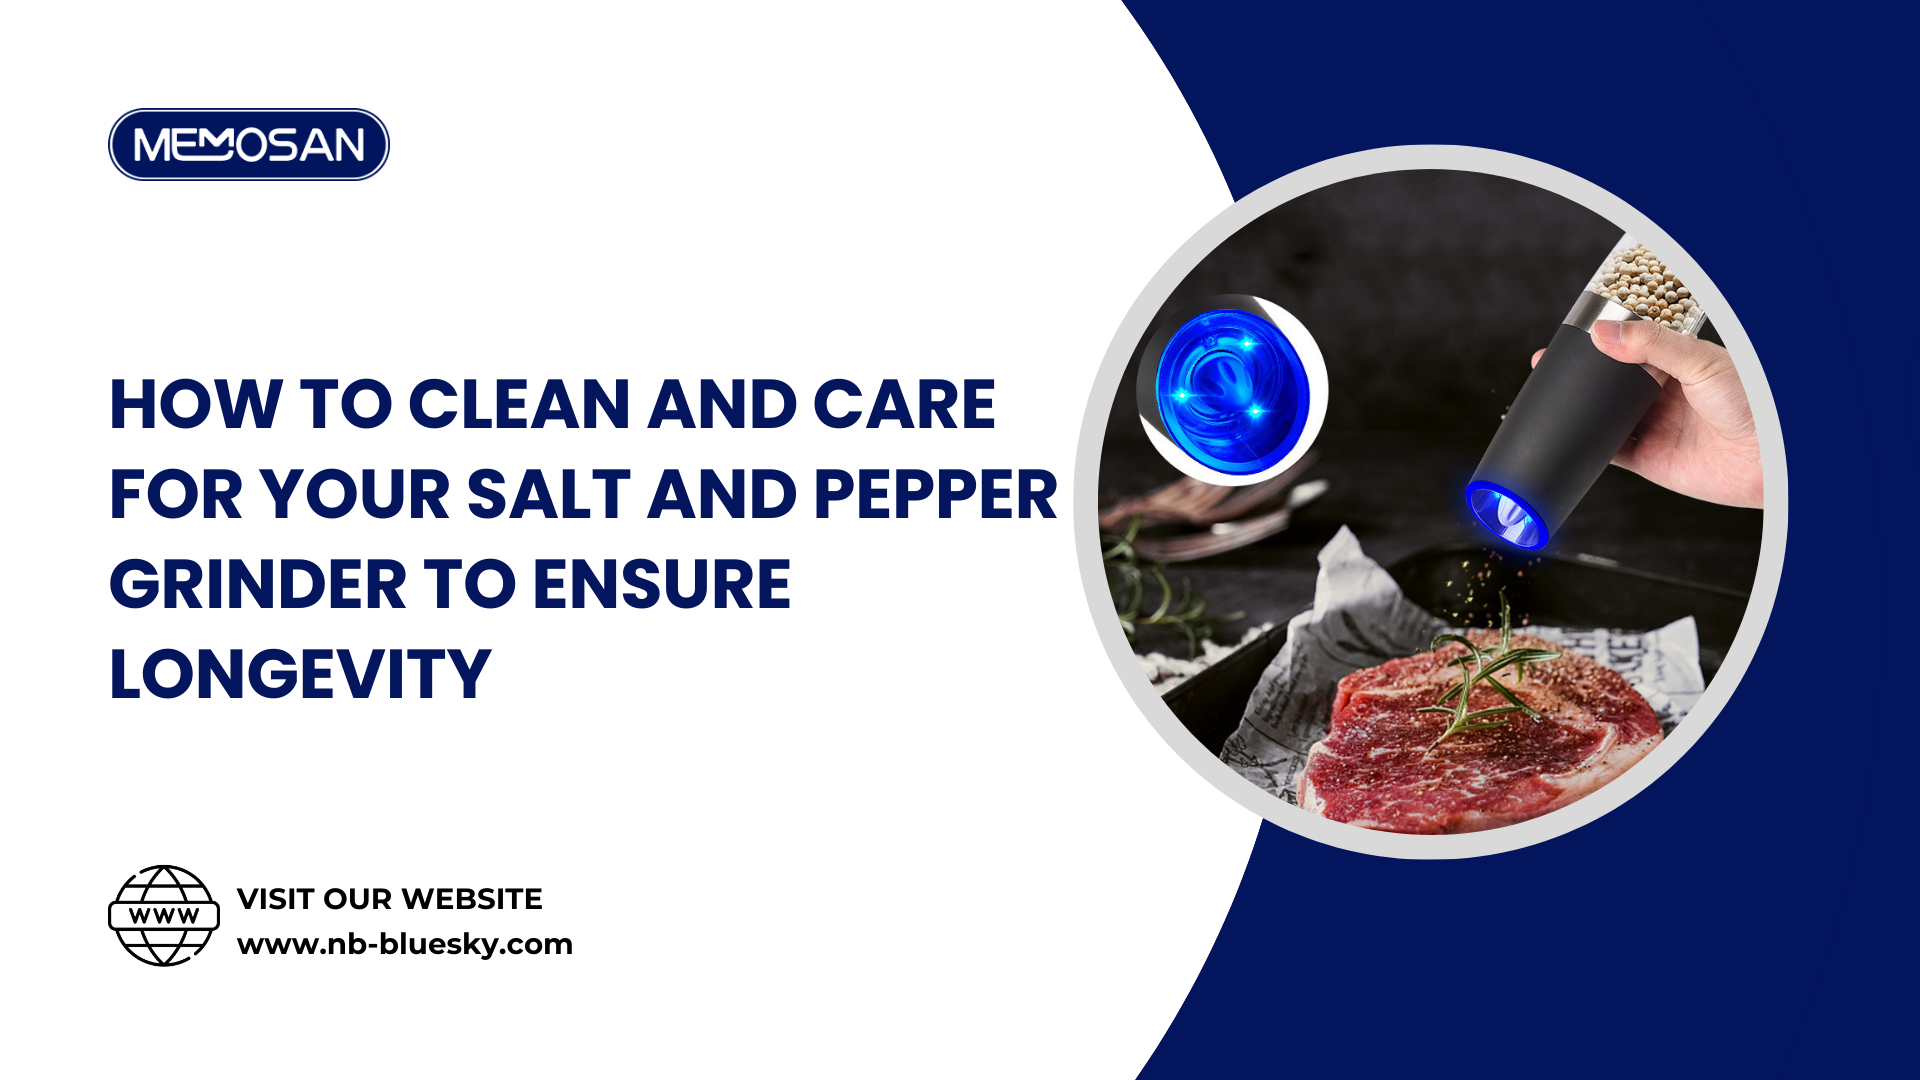 How to Clean and Care for Your Salt and Pepper Grinders to Ensure Longevity